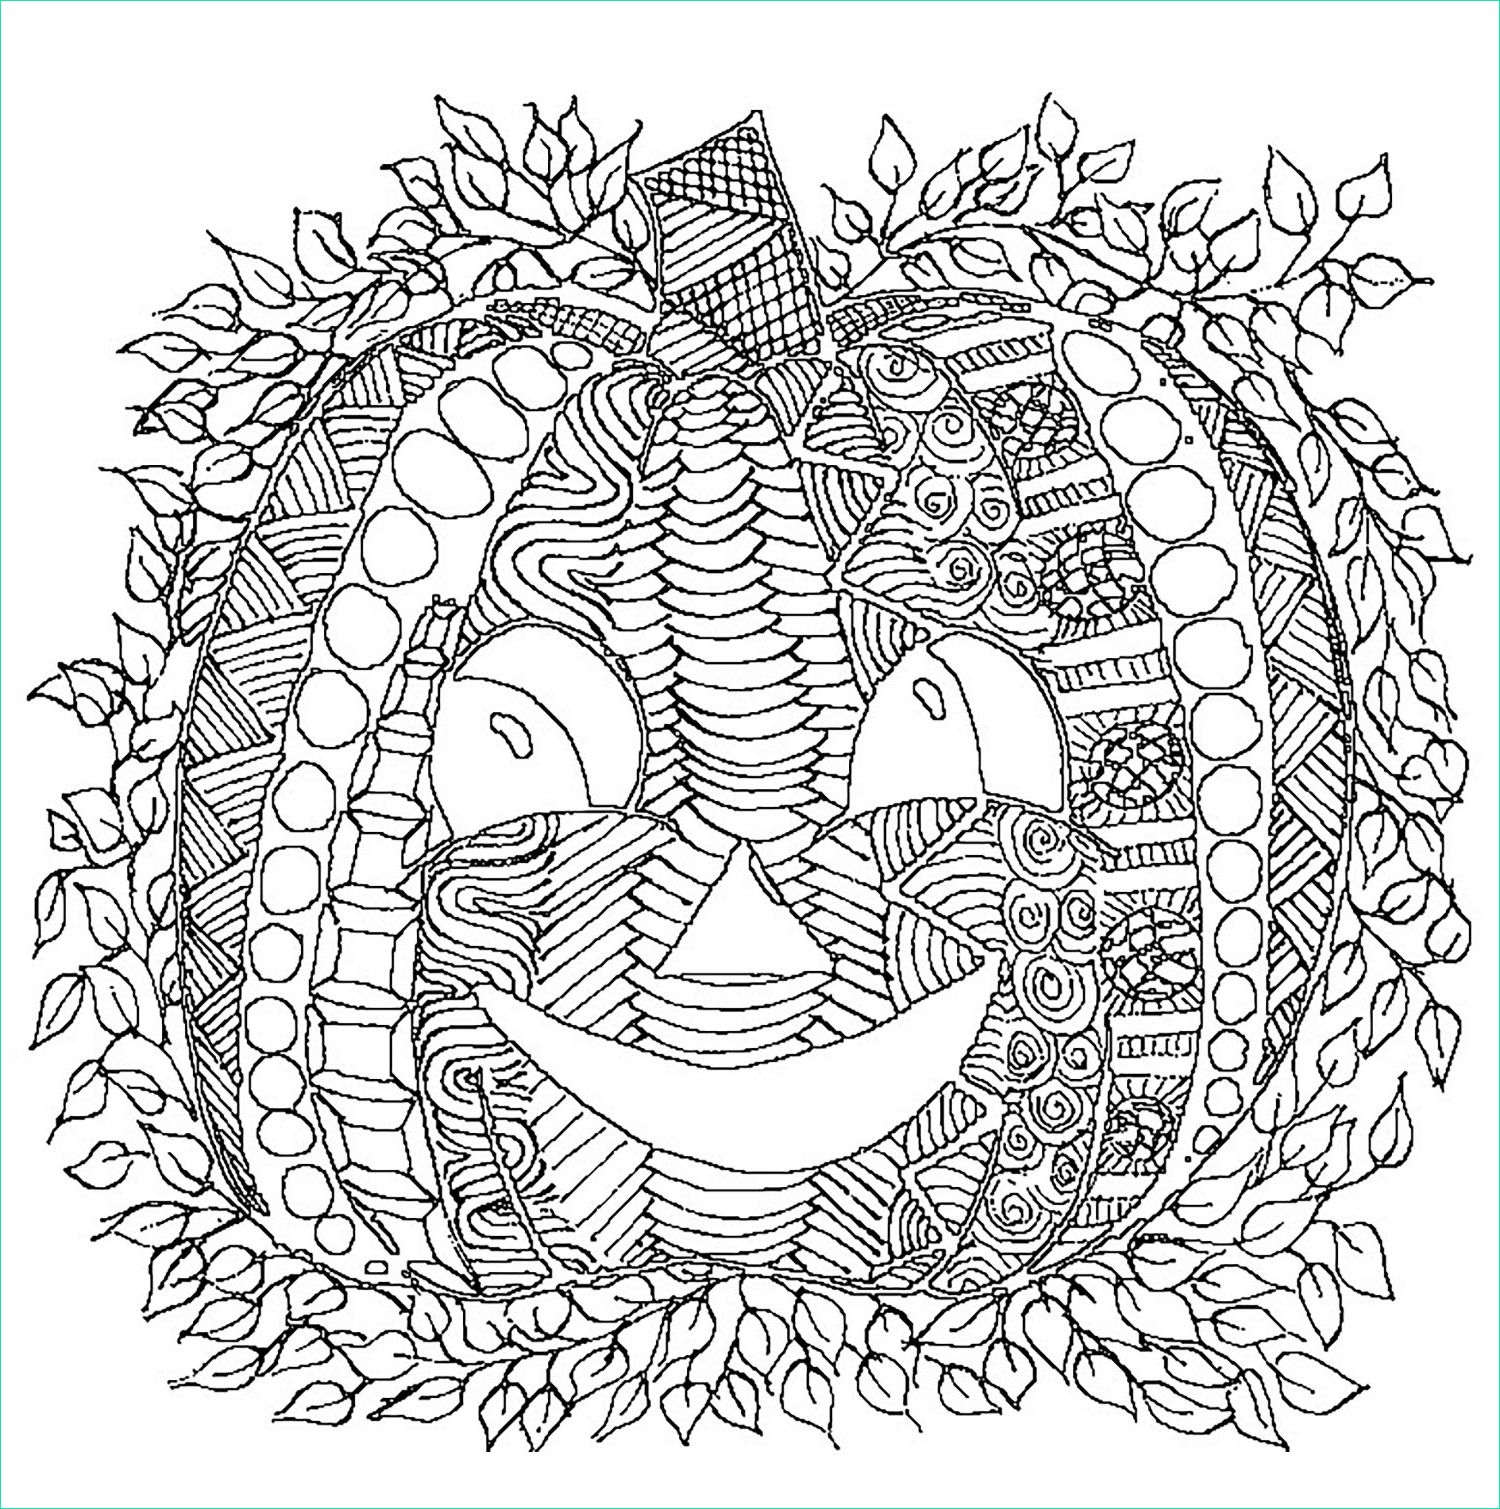 image=coloriages halloween coloriage halloween dessin citrouille 1